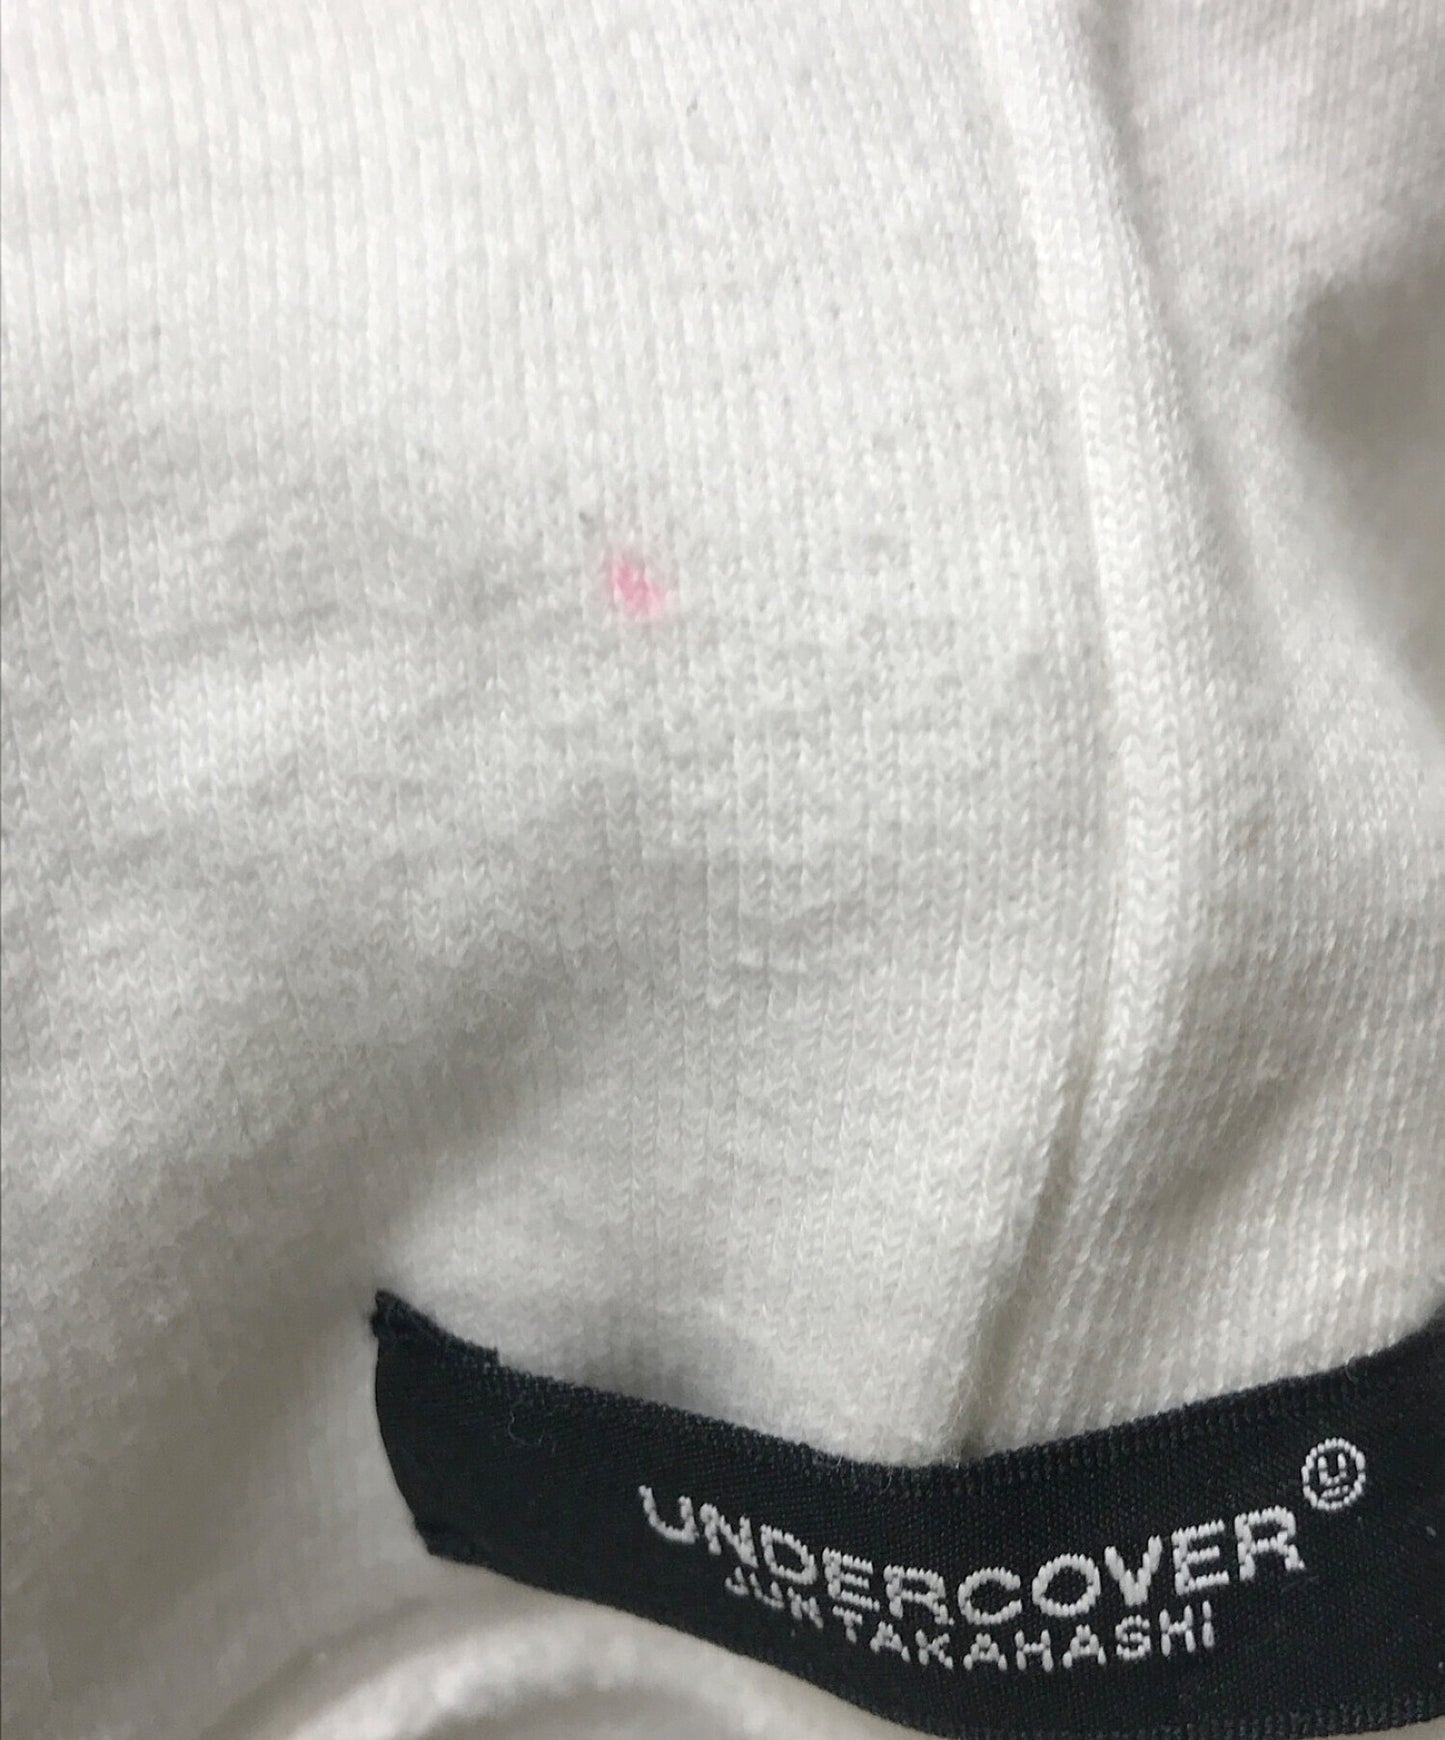 [Pre-owned] UNDERCOVER HOODIE 2nd Angel Lilith